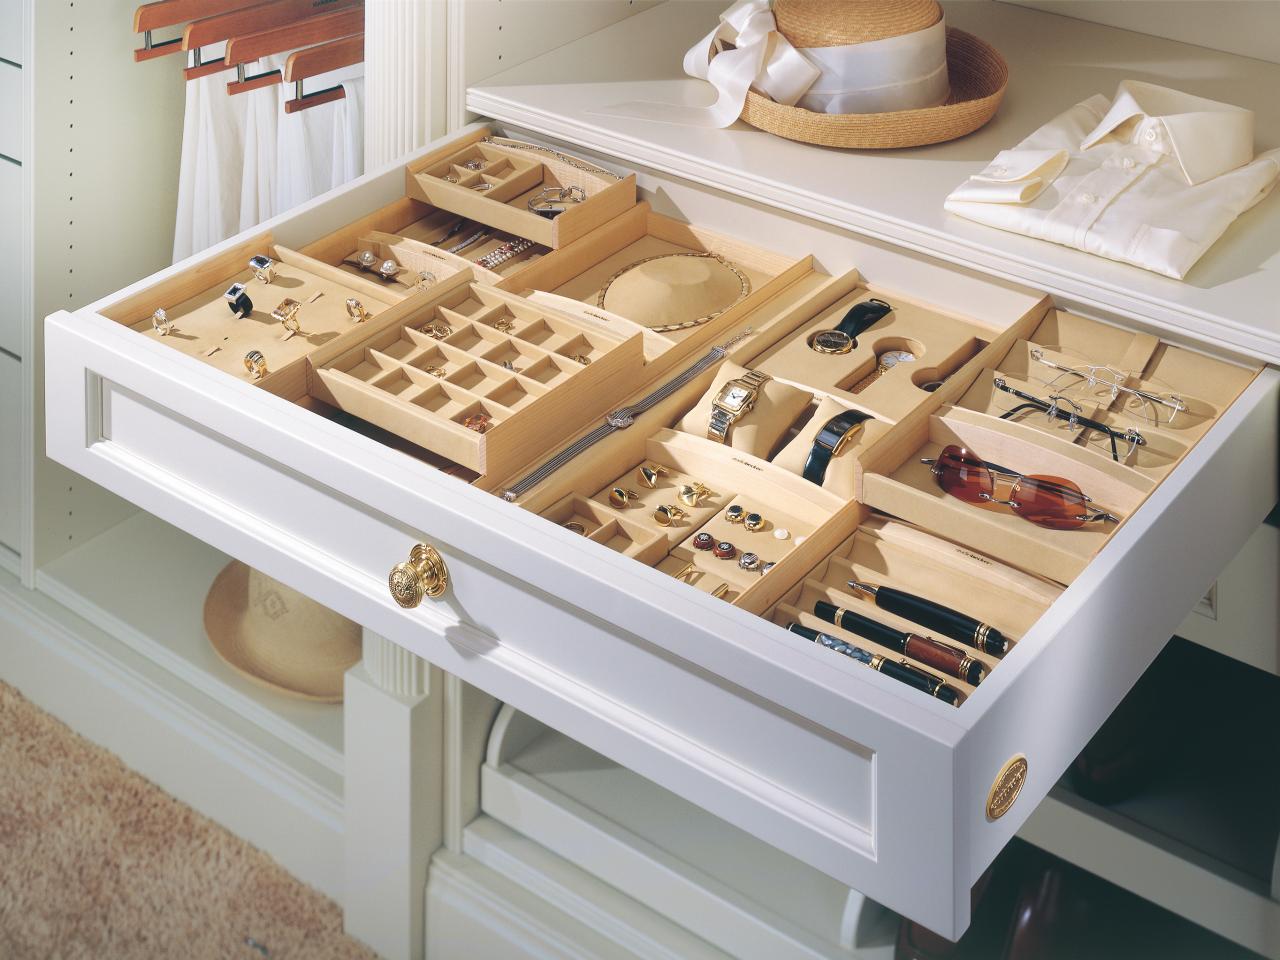 10 of the Top Jewelry Storage Tips to Keep Your Jewelry Looking Its Best